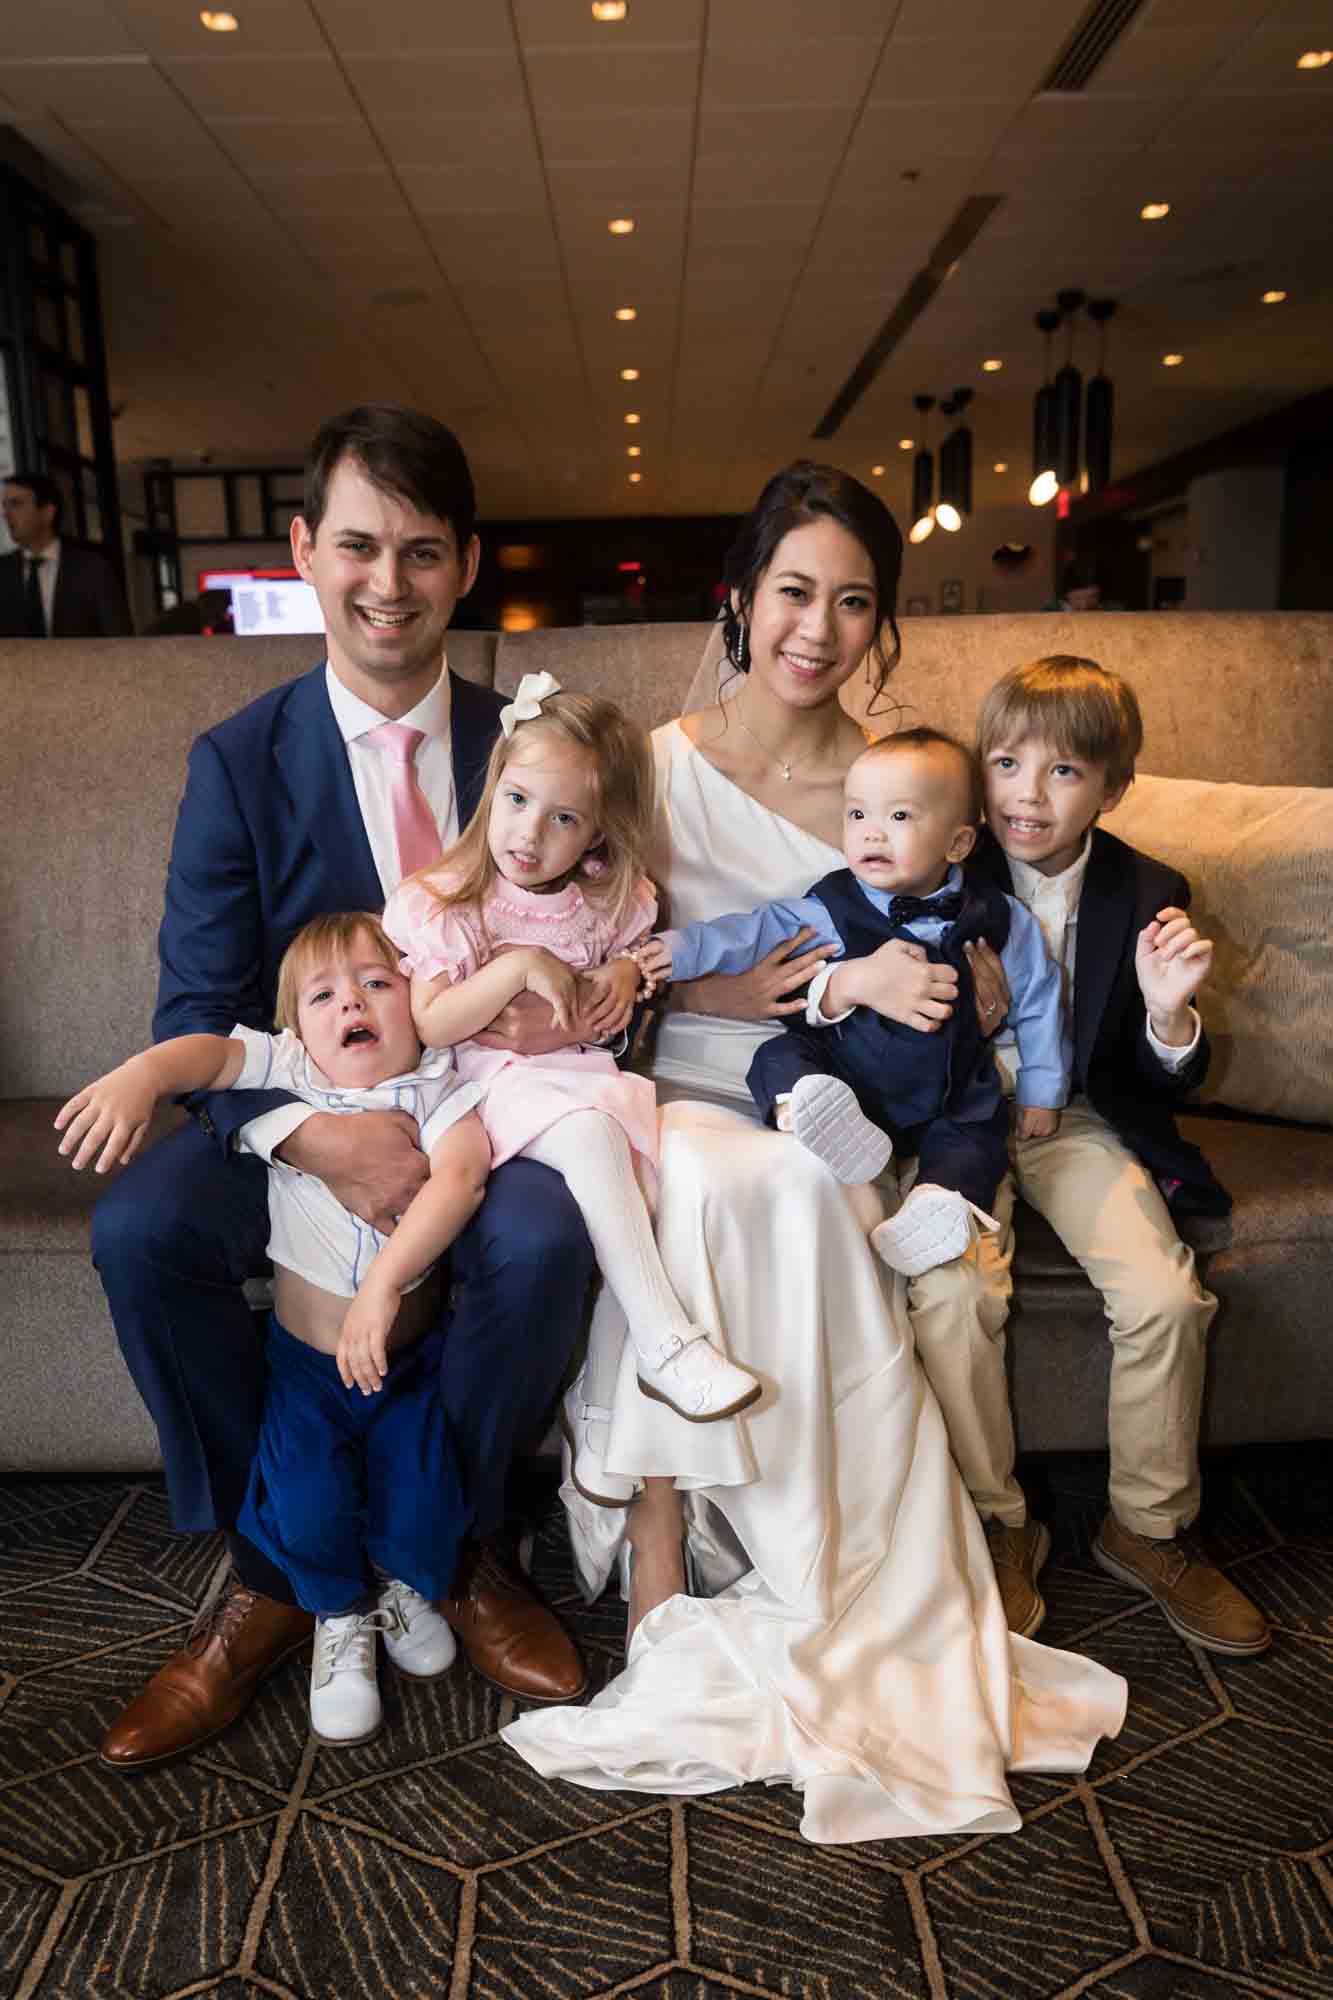 Bride and groom sitting on couch surrounded by children